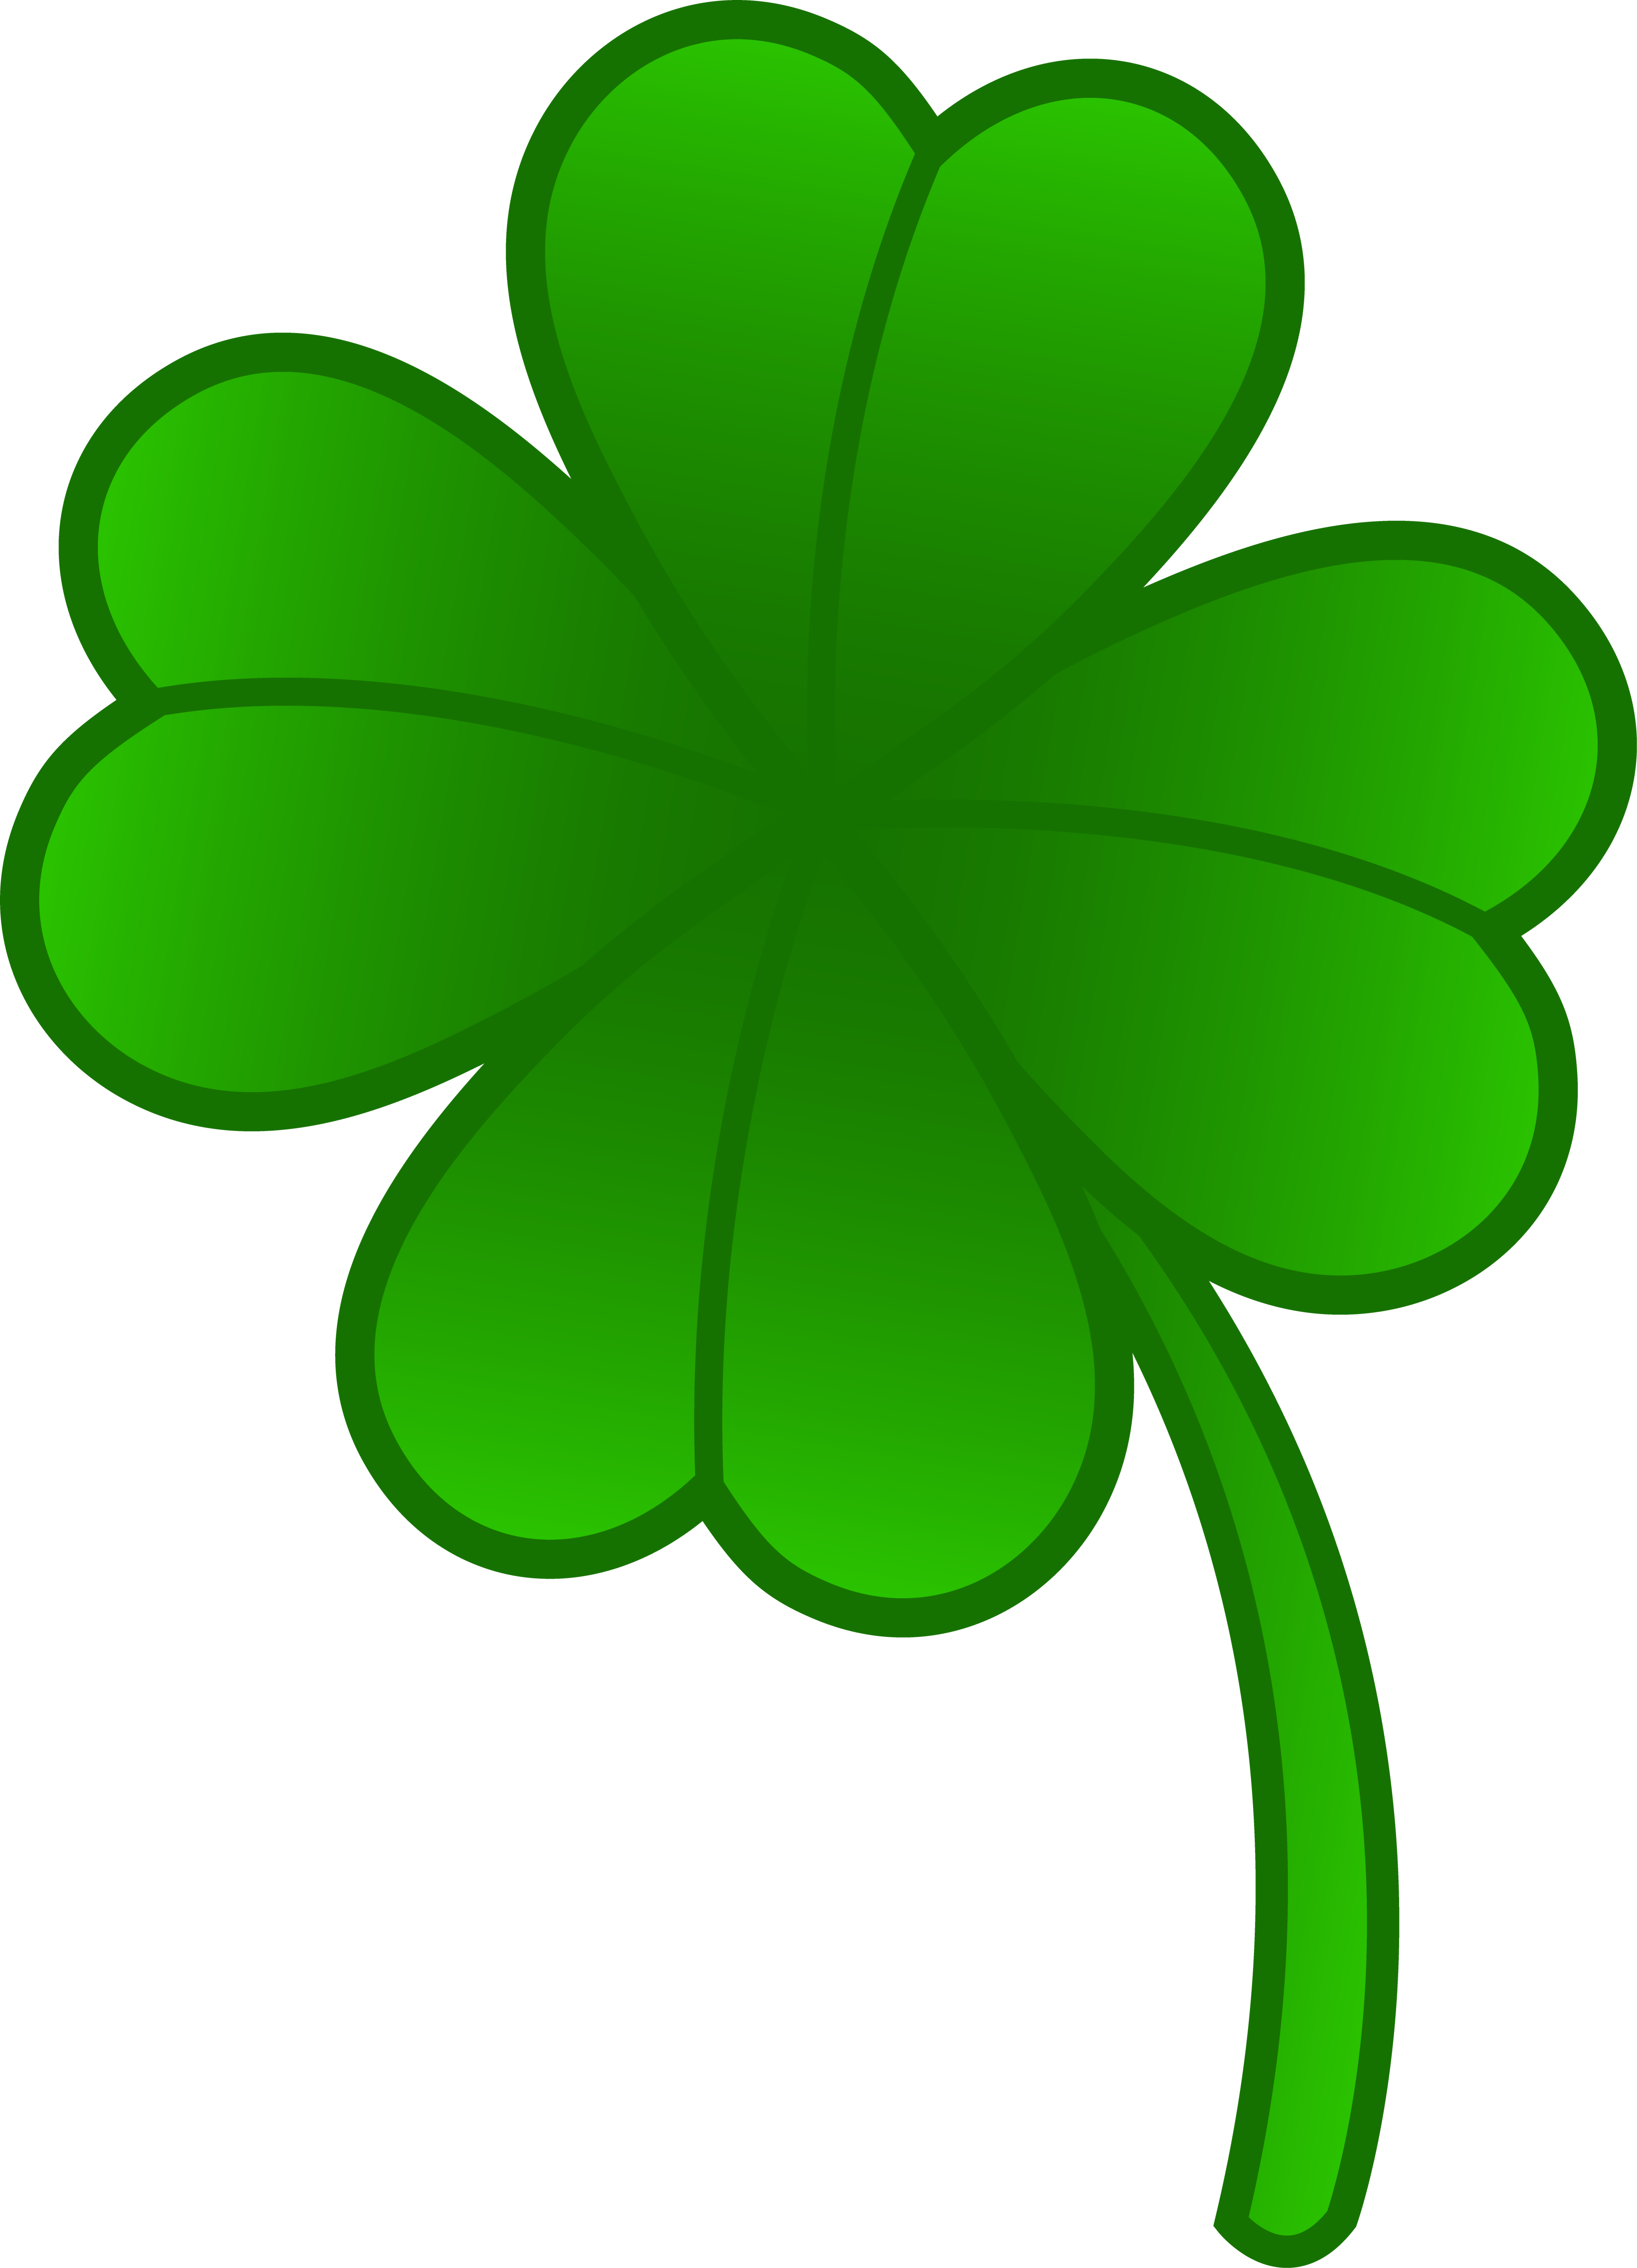 Four Leaf Clover Clipart - Free to use Clip Art Resource